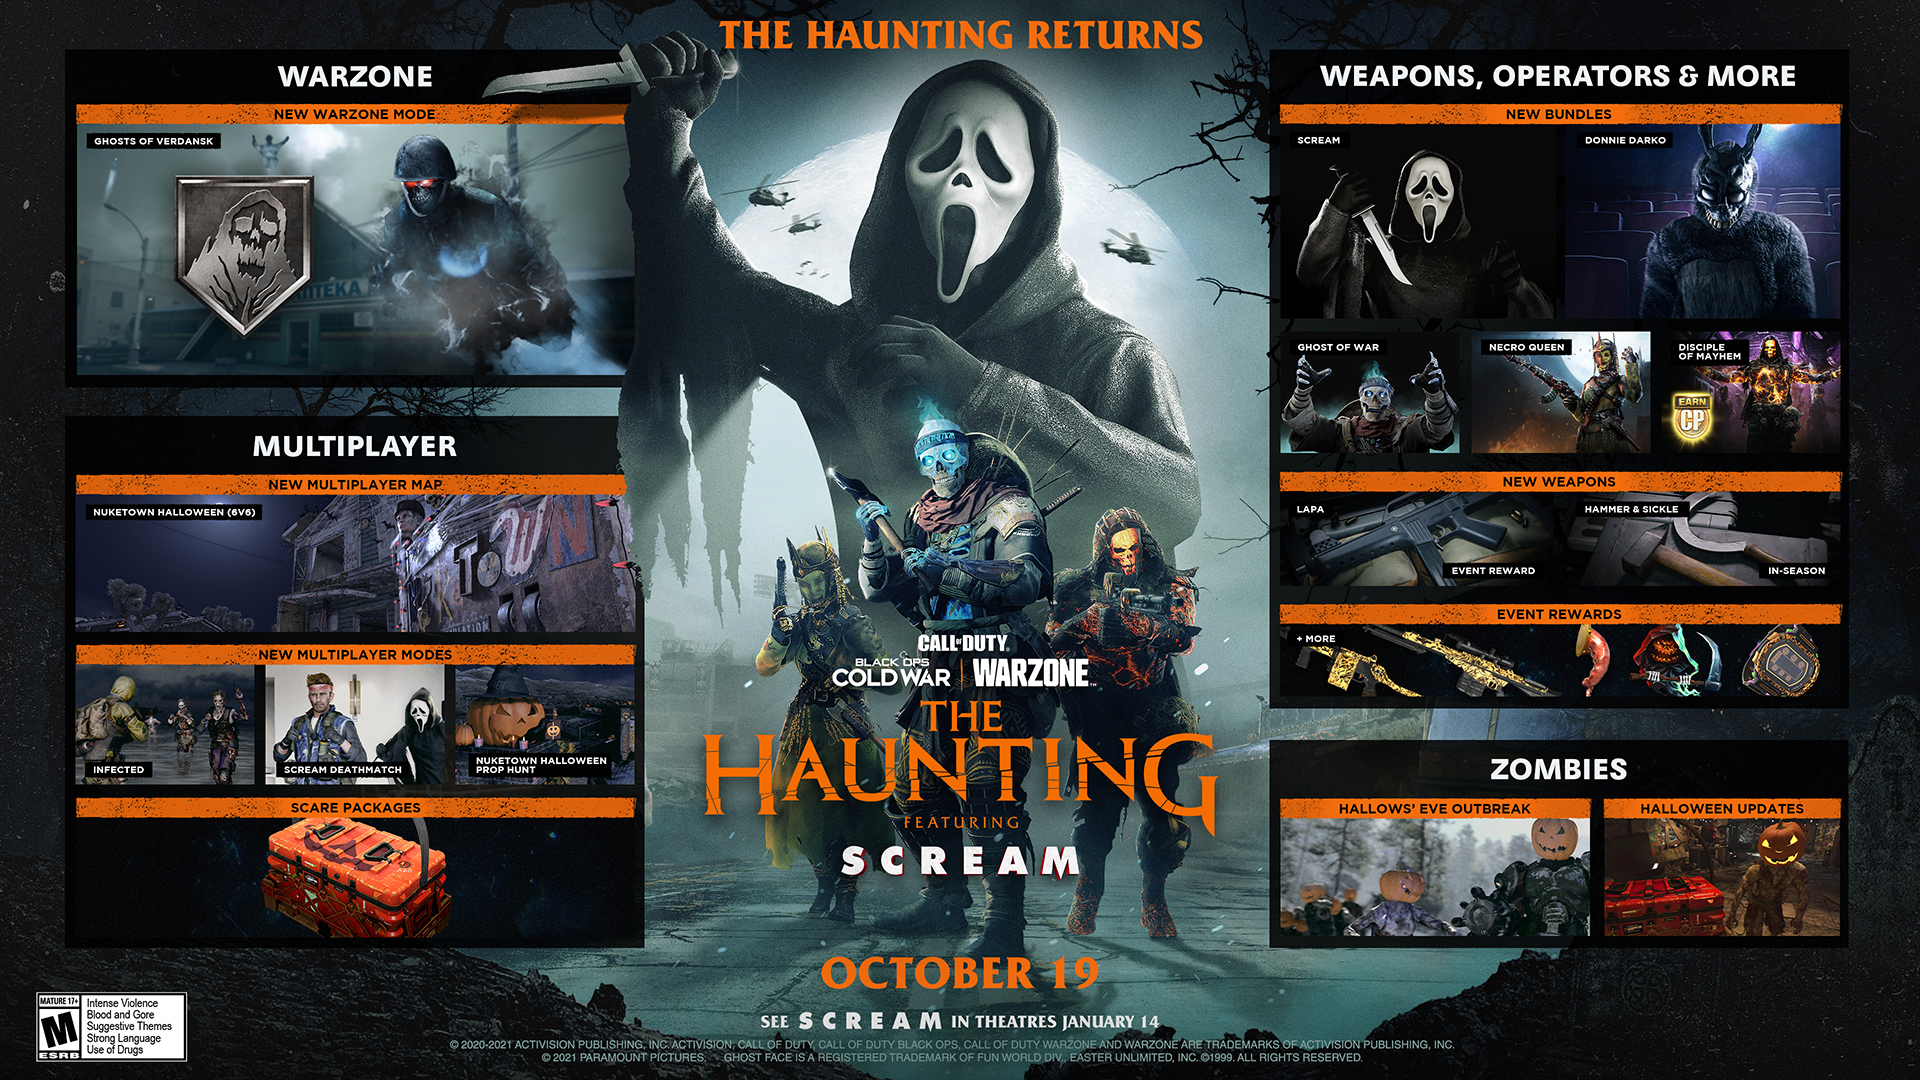 The Haunting Returns Feature Image